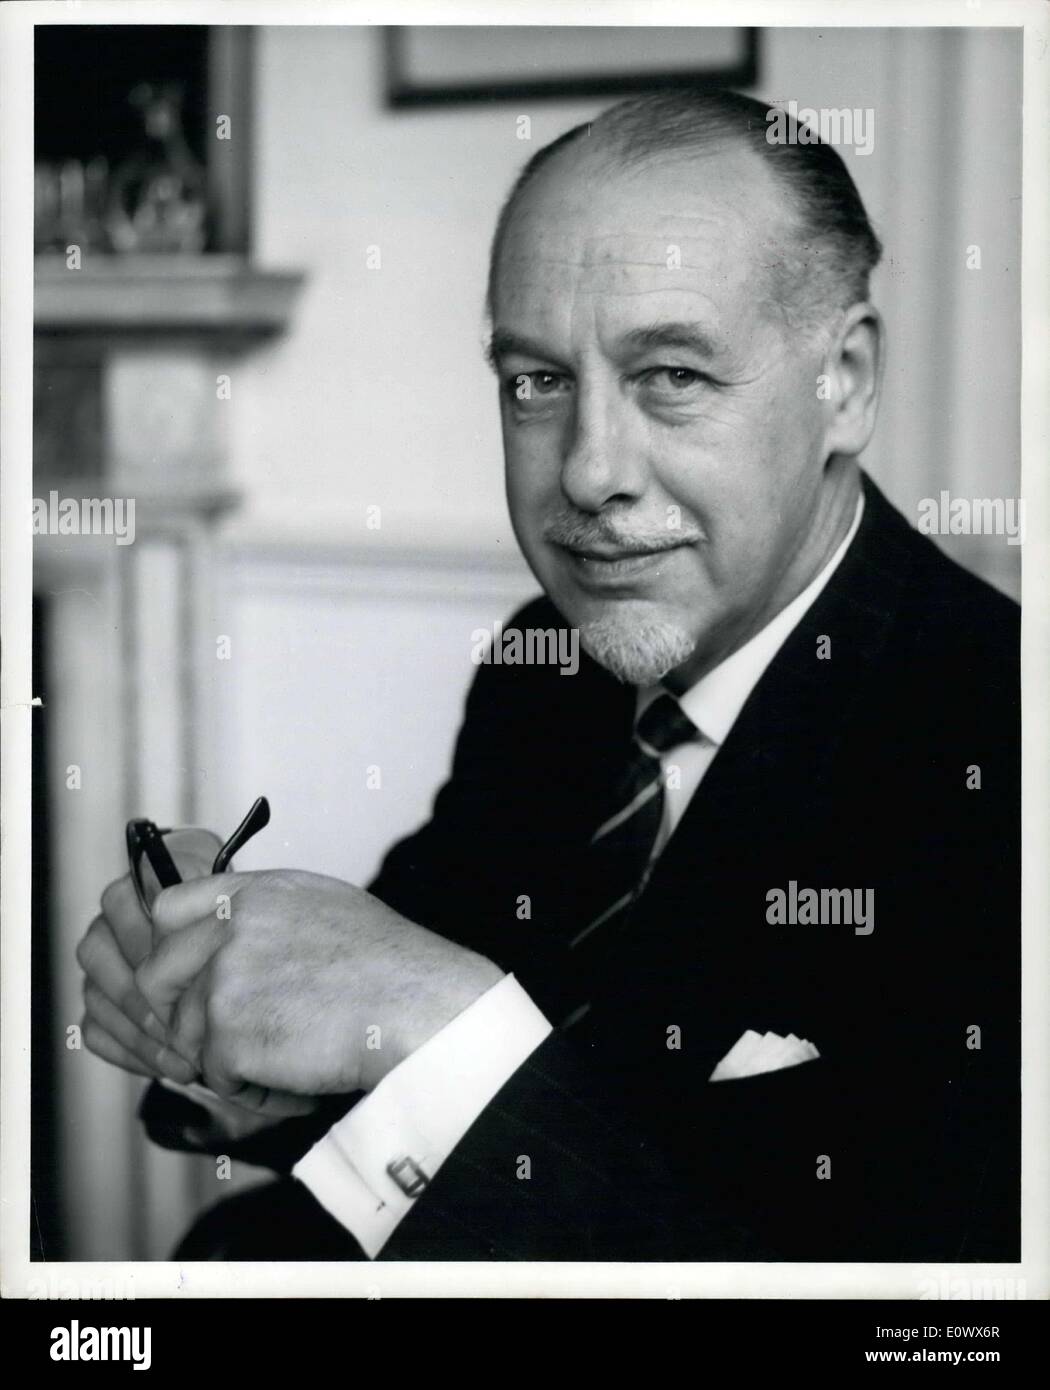 May 27, 1964 - British High Commissioner In Cyprus: A New Portrait Of Sir  Arthur Clark, The British High Commissioner In Cyprus, Issued In  Conjunction With A Press Release Today Stock Photo - Alamy